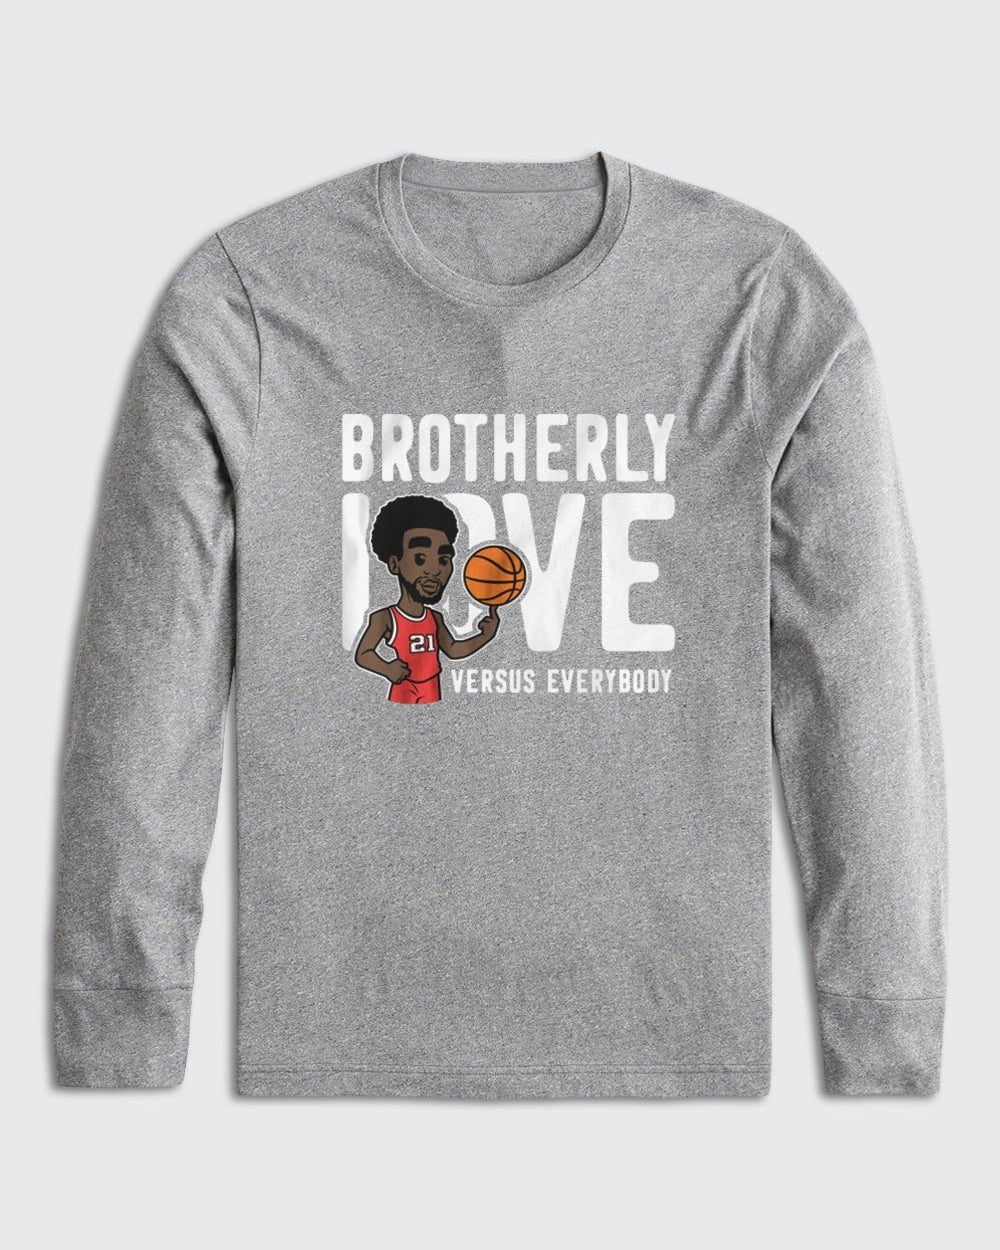 Brotherly Love Vs Everybody Long Sleeve - 76ers, Long Sleeve - Philly Sports Shirts